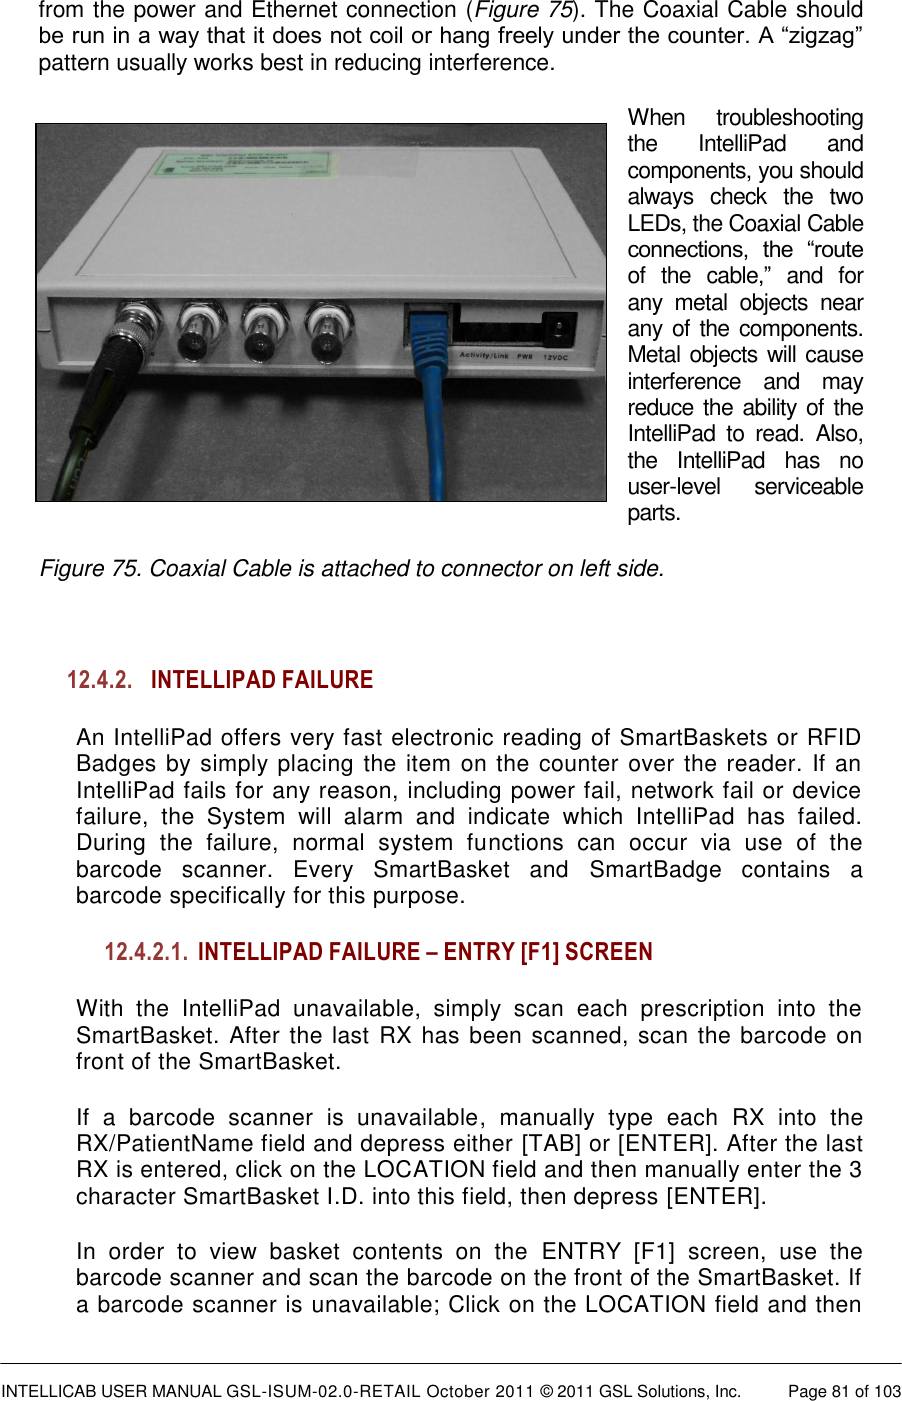  INTELLICAB USER MANUAL GSL-ISUM-02.0-RETAIL October 2011 © 2011 GSL Solutions, Inc.   Page 81 of 103   from the power and Ethernet connection (Figure 75). The Coaxial Cable should be run in a way that it does not coil or hang freely under the counter. A “zigzag” pattern usually works best in reducing interference. When  troubleshooting the  IntelliPad  and components, you should always  check  the  two LEDs, the Coaxial Cable connections,  the  “route of  the  cable,”  and  for any  metal  objects  near any of the components. Metal objects will cause interference  and  may reduce the ability of the IntelliPad  to  read.  Also, the  IntelliPad  has  no user-level  serviceable parts. Figure 75. Coaxial Cable is attached to connector on left side.  12.4.2. INTELLIPAD FAILURE An IntelliPad offers very fast electronic reading of SmartBaskets or RFID Badges by simply placing the item on the counter over the reader. If an IntelliPad fails for any reason, including power fail, network fail or device failure,  the  System  will  alarm  and  indicate  which  IntelliPad  has  failed. During  the  failure,  normal  system  functions  can  occur  via  use  of  the barcode  scanner.  Every  SmartBasket  and  SmartBadge  contains  a barcode specifically for this purpose.  12.4.2.1. INTELLIPAD FAILURE – ENTRY [F1] SCREEN With  the  IntelliPad  unavailable,  simply  scan  each  prescription  into  the SmartBasket. After the last RX has been scanned, scan the barcode on front of the SmartBasket. If  a  barcode  scanner  is  unavailable,  manually  type  each  RX  into  the RX/PatientName field and depress either [TAB] or [ENTER]. After the last RX is entered, click on the LOCATION field and then manually enter the 3 character SmartBasket I.D. into this field, then depress [ENTER]. In  order  to  view  basket  contents  on  the  ENTRY  [F1]  screen,  use  the barcode scanner and scan the barcode on the front of the SmartBasket. If a barcode scanner is unavailable; Click on the LOCATION field and then 